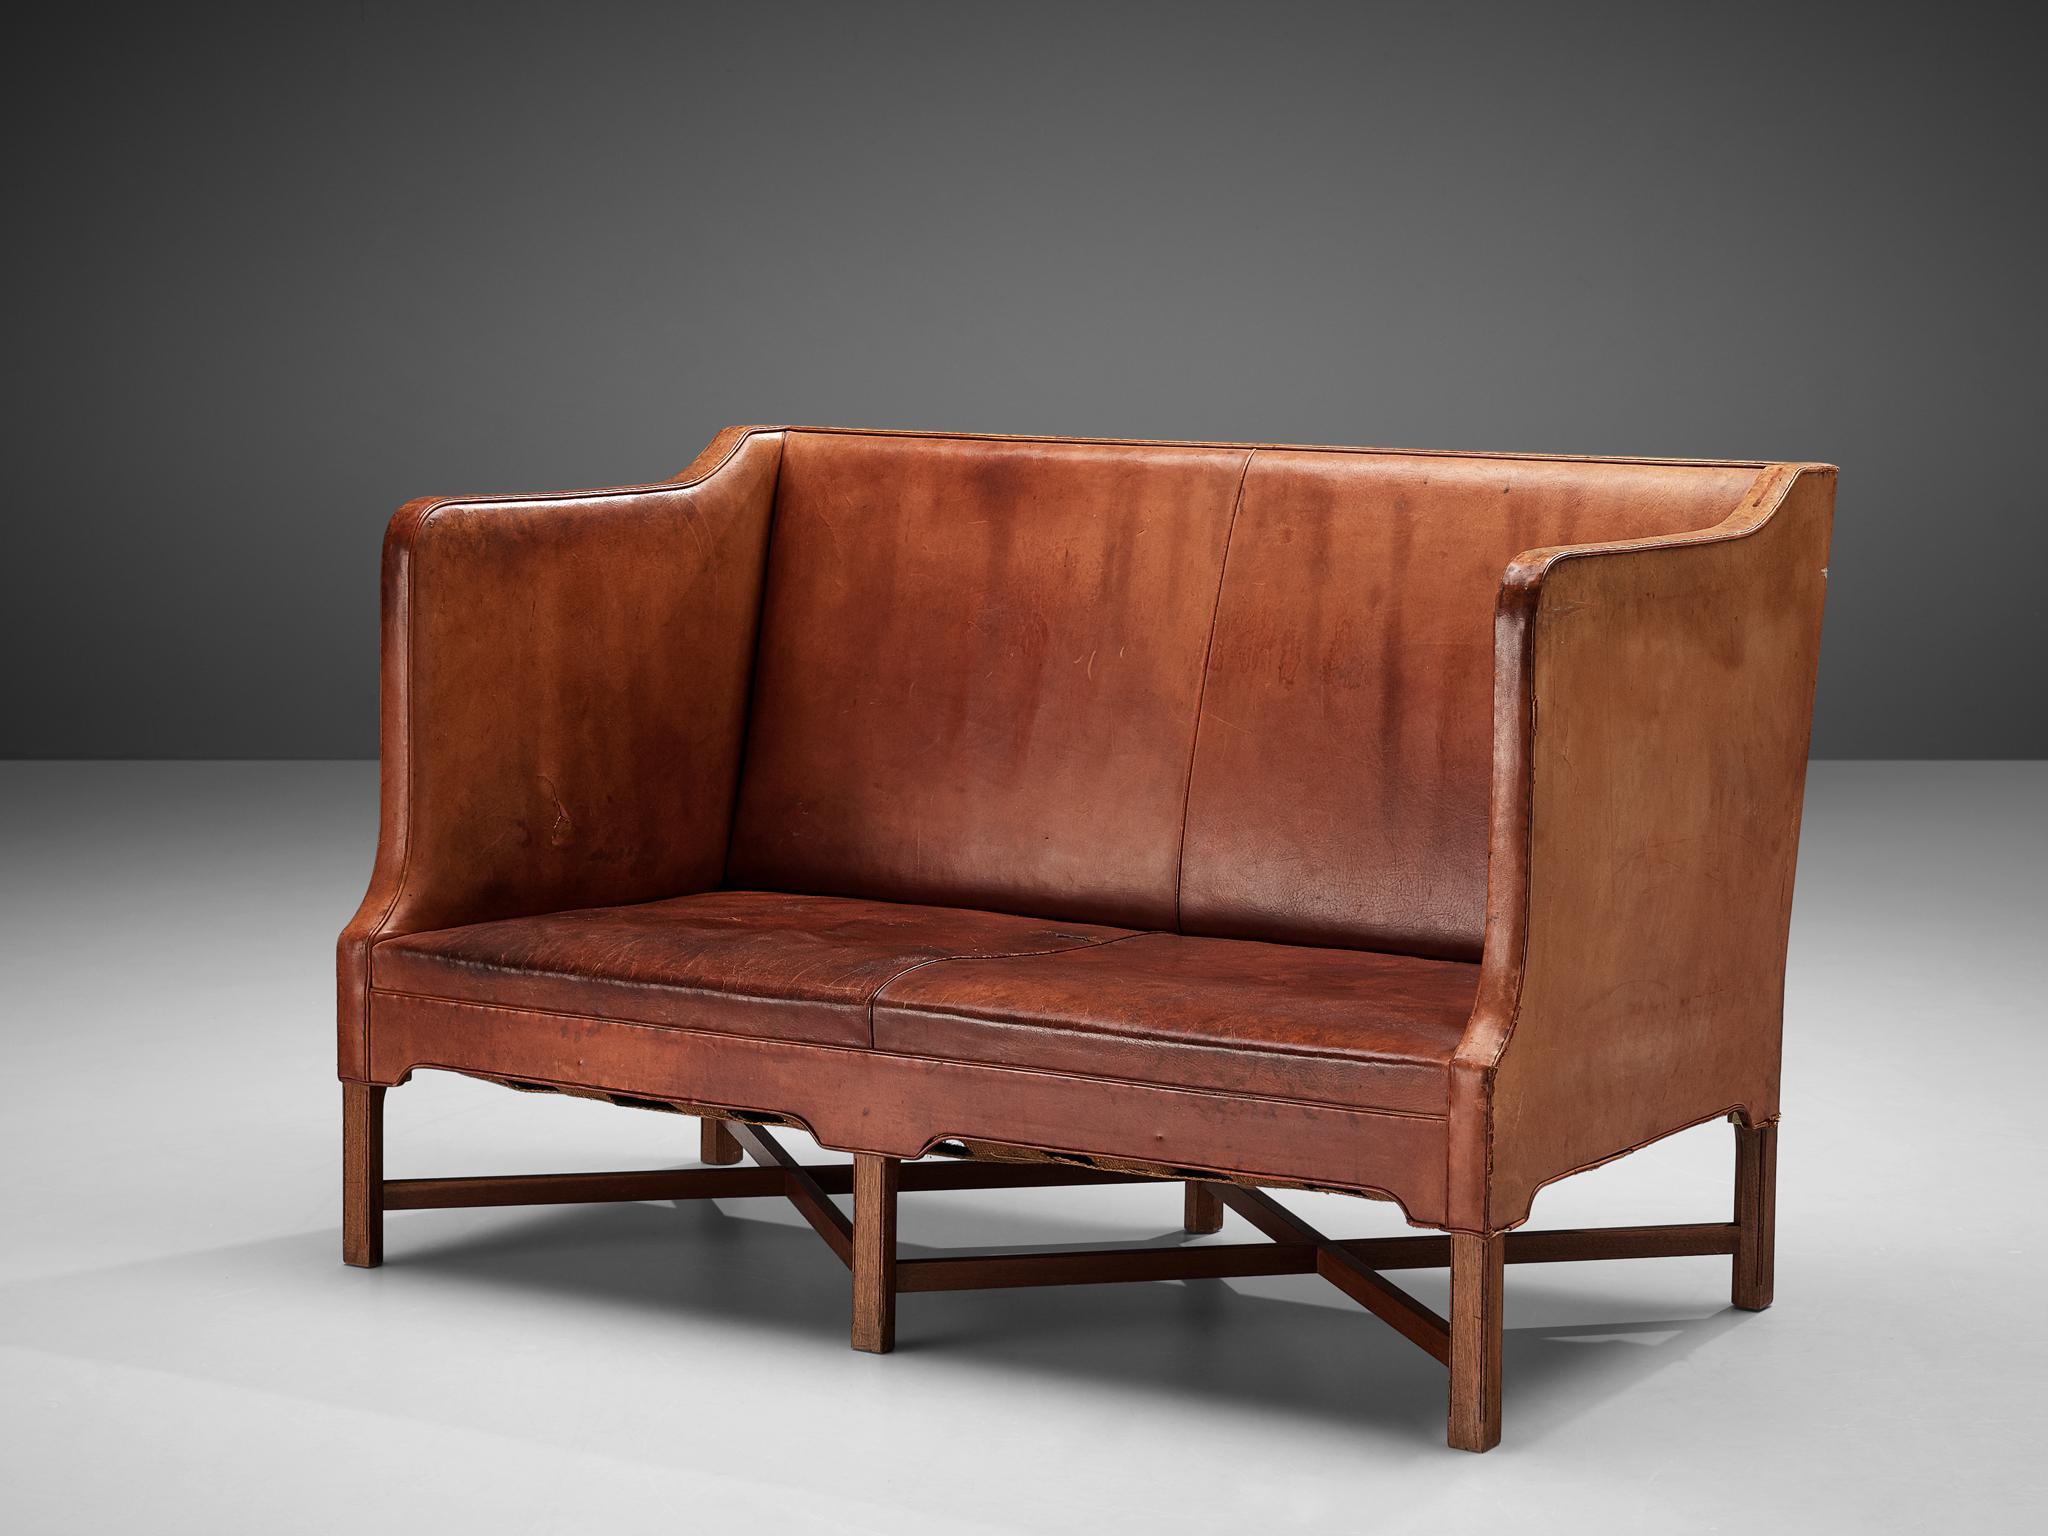 Kaare Klint for Rud Rasmussen, sofa model '4118', original leather, mahogany, Denmark, 1930s

Classic and elegant Scandinavian two-seat sofa by Kaare Klint for manufacturer Rud Rasmussen. The piece is upholstered with patinated original leather. The